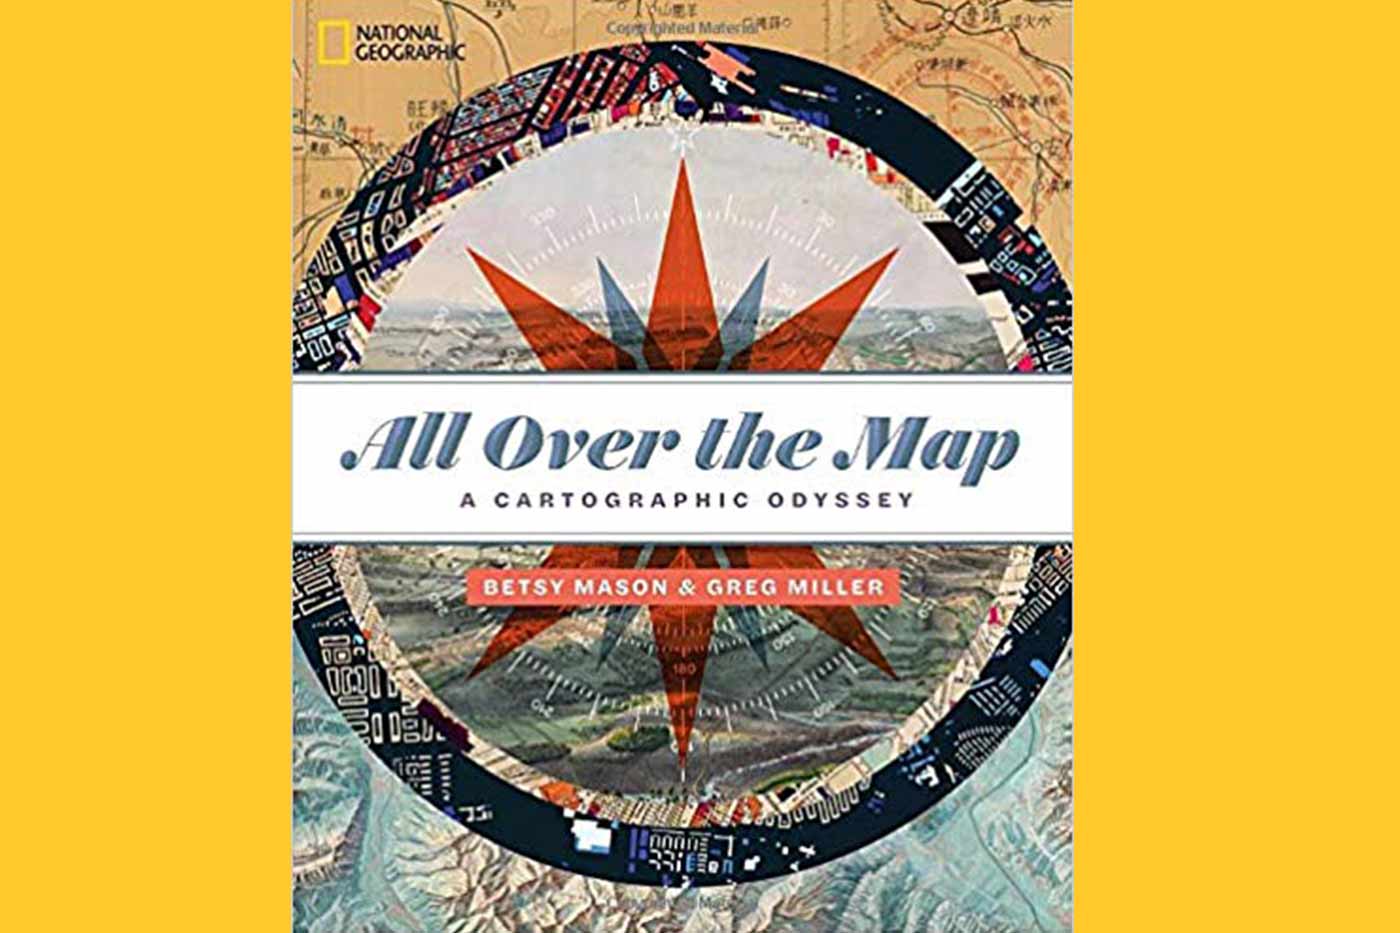 All over the map book